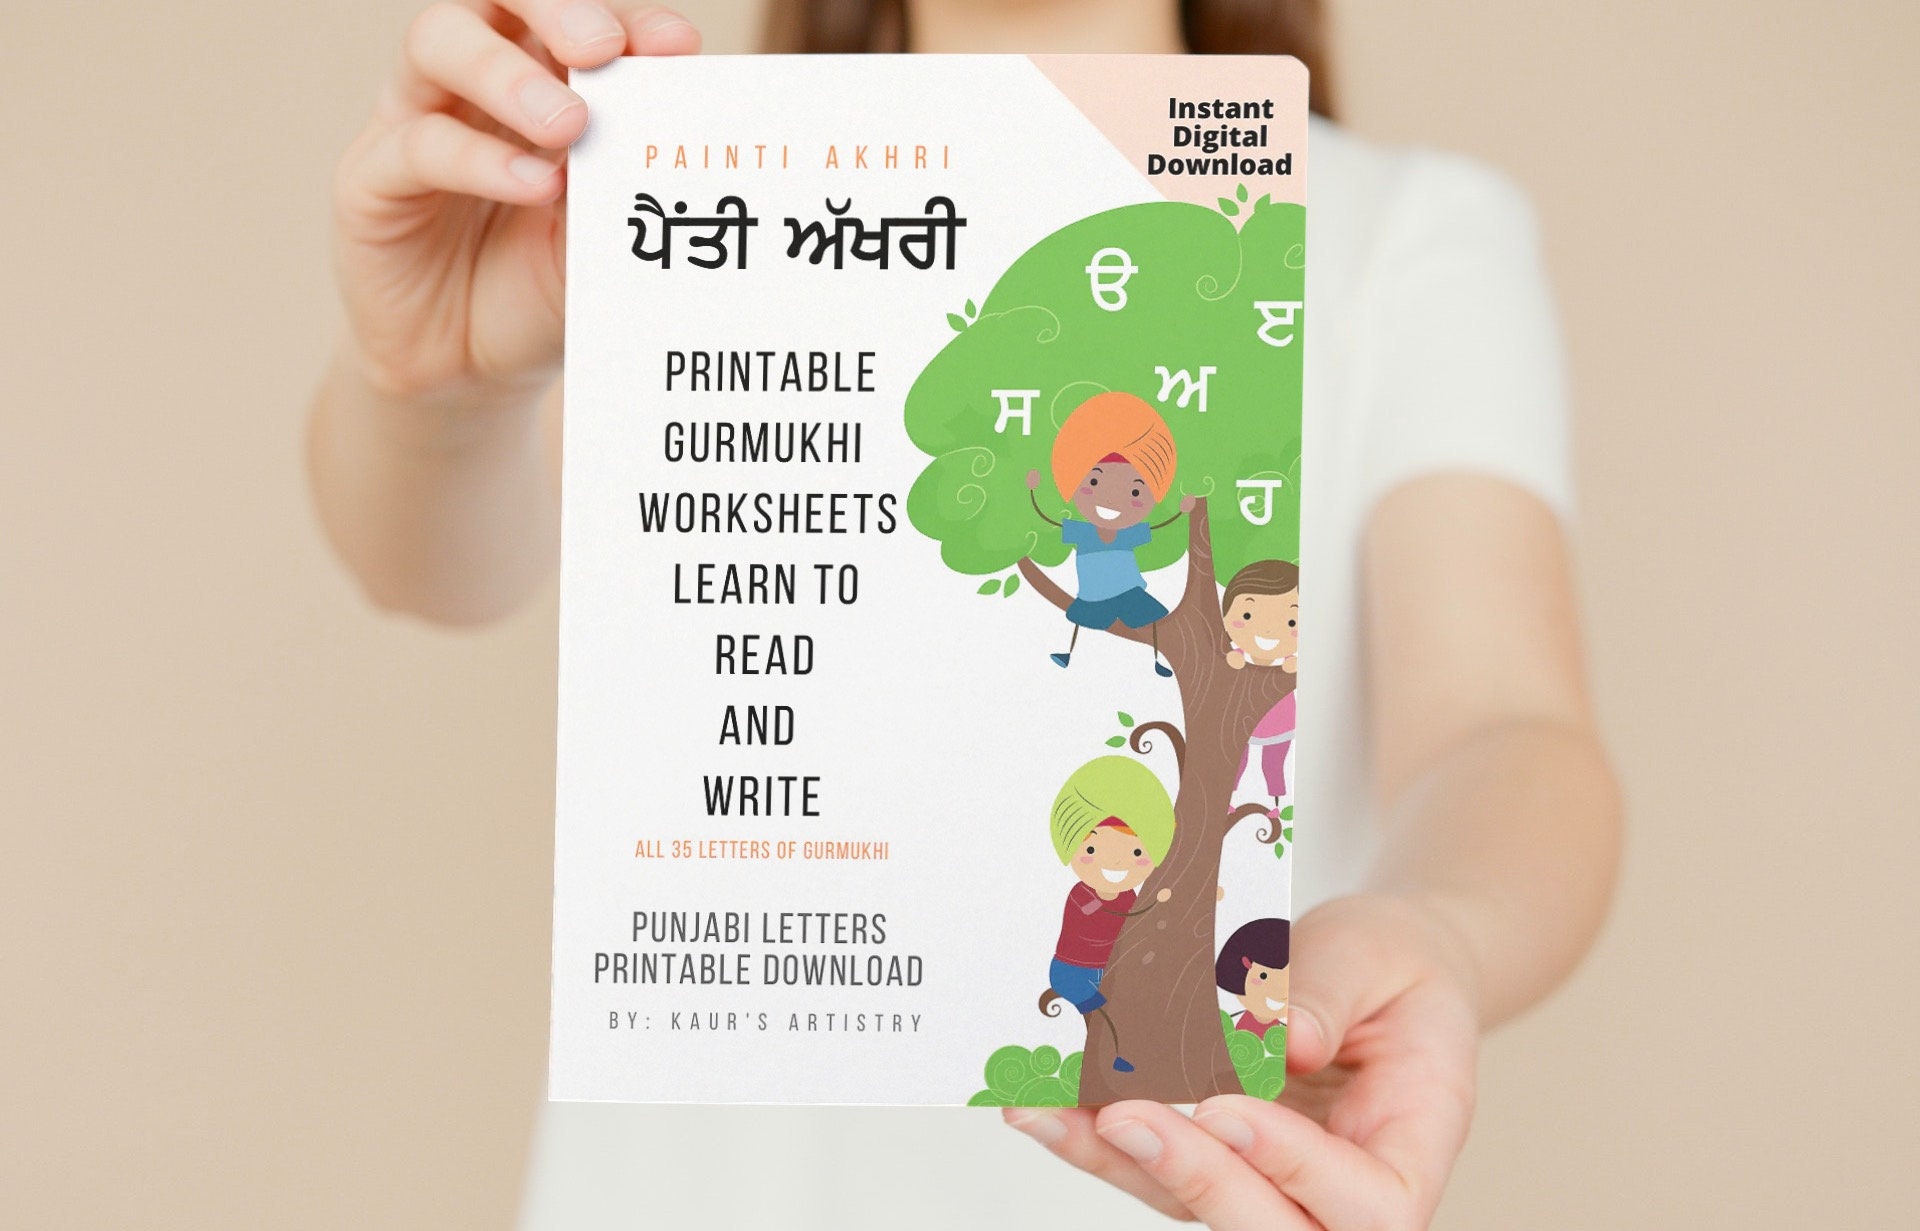 punjabi-book-worksheets-printable-learn-to-read-and-write-etsy